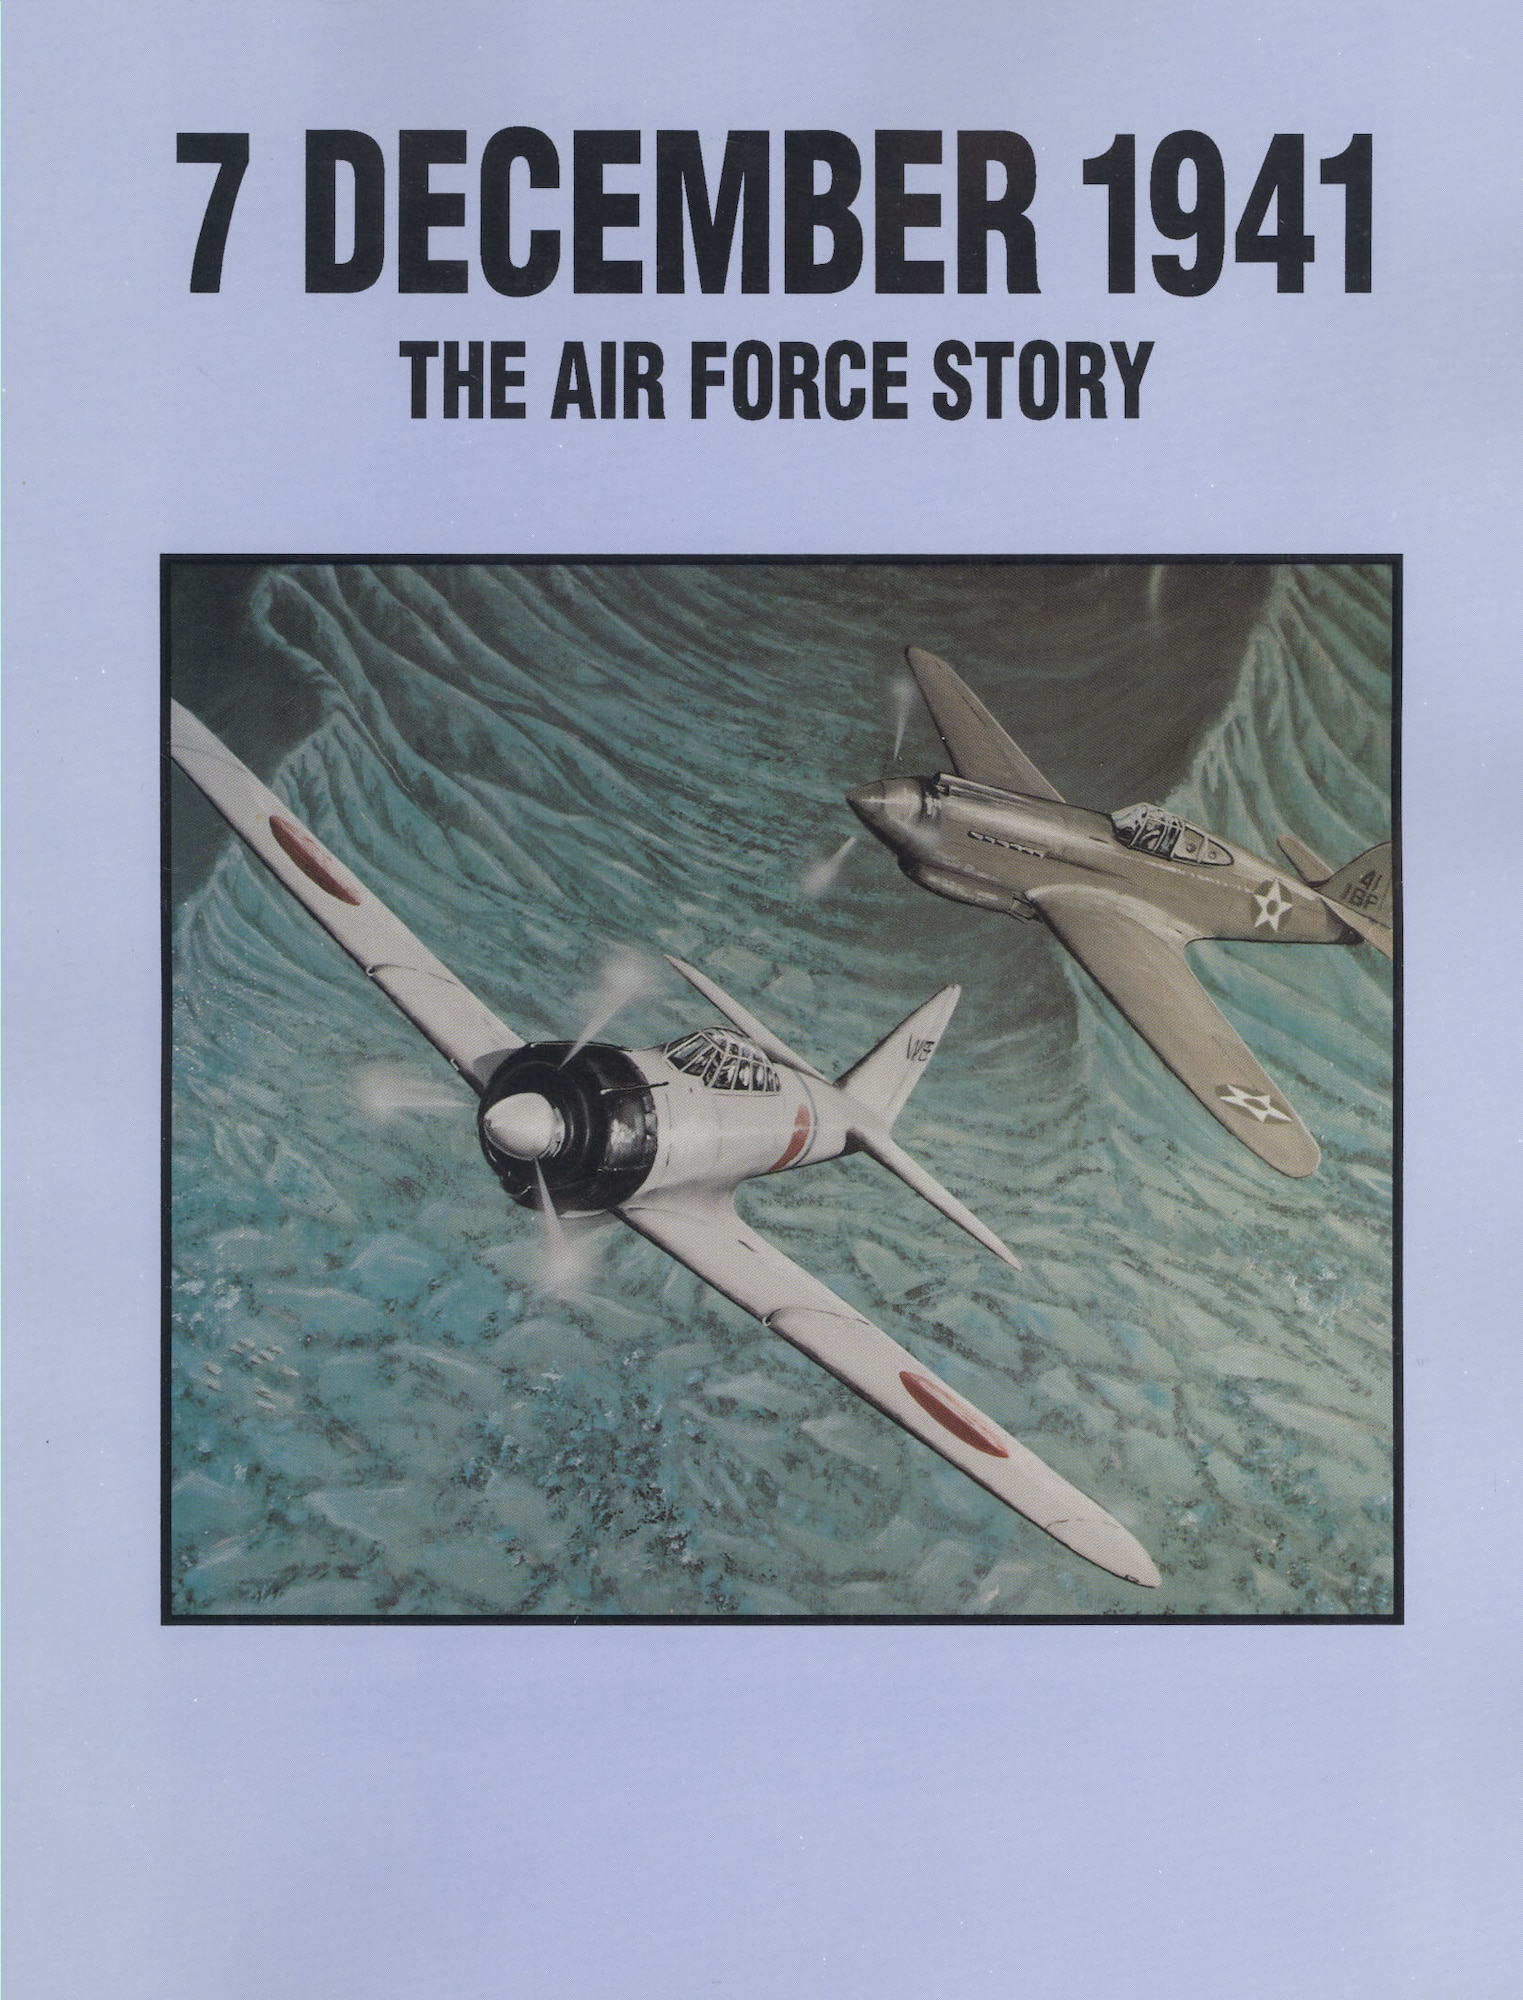 the Air Force Story